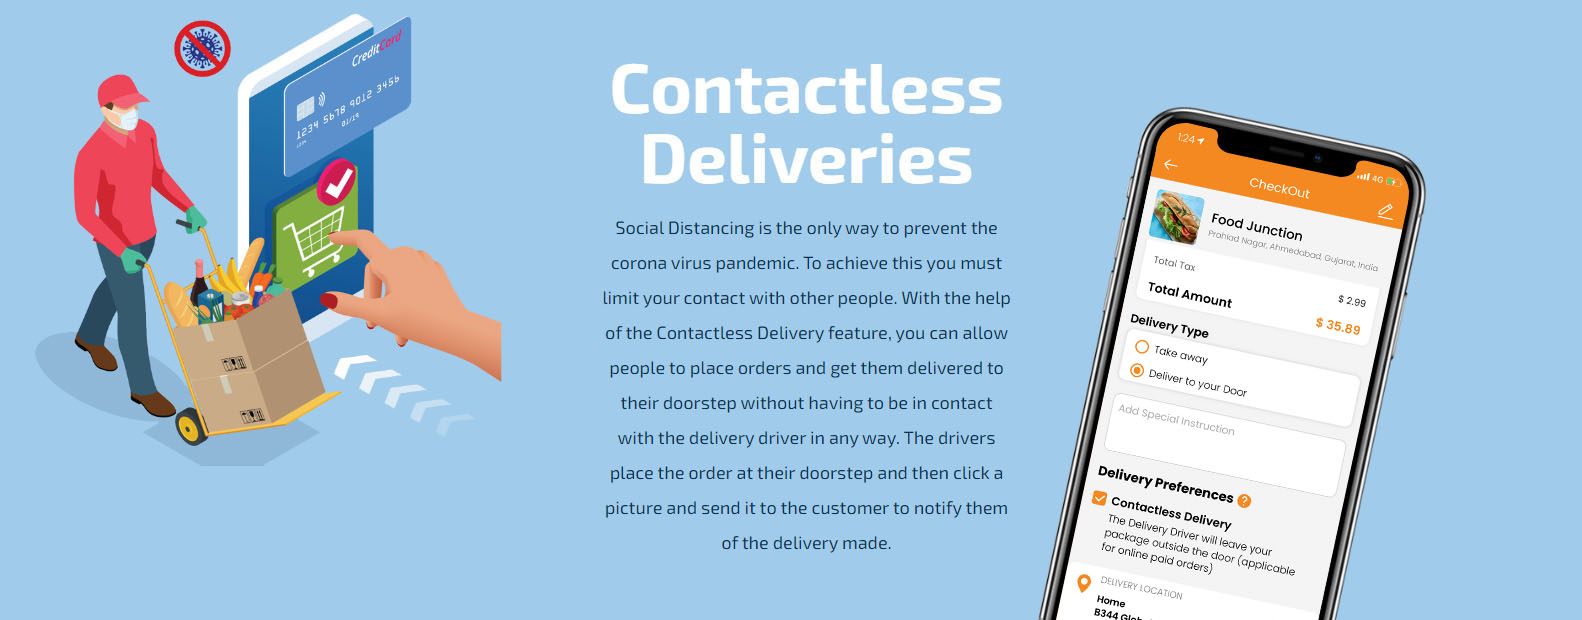 deliverall - contactless deliveries